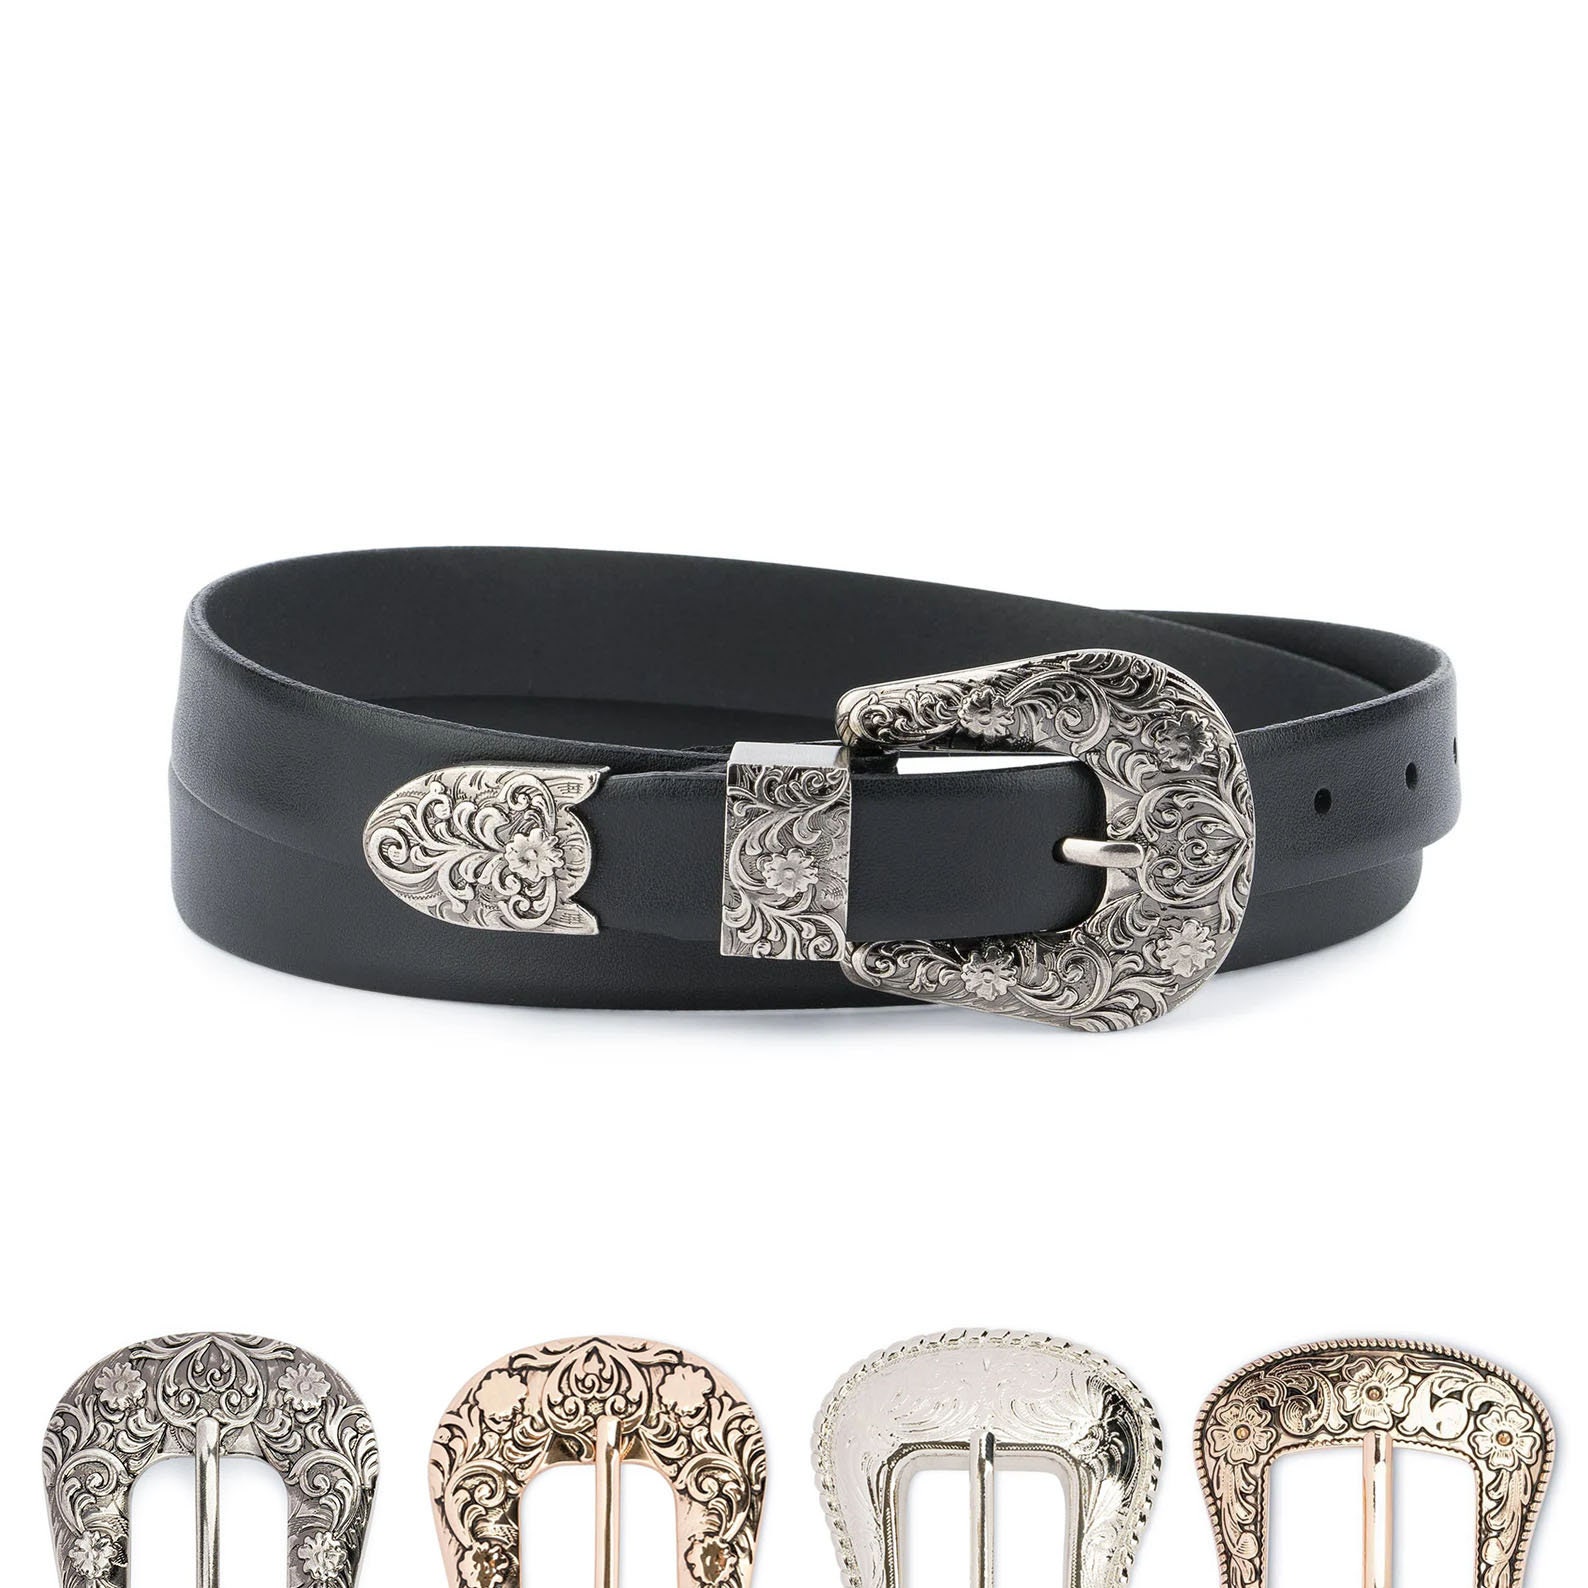 Opulent Luxury Belt Buckles to Keep Your Pants Elevated in Style